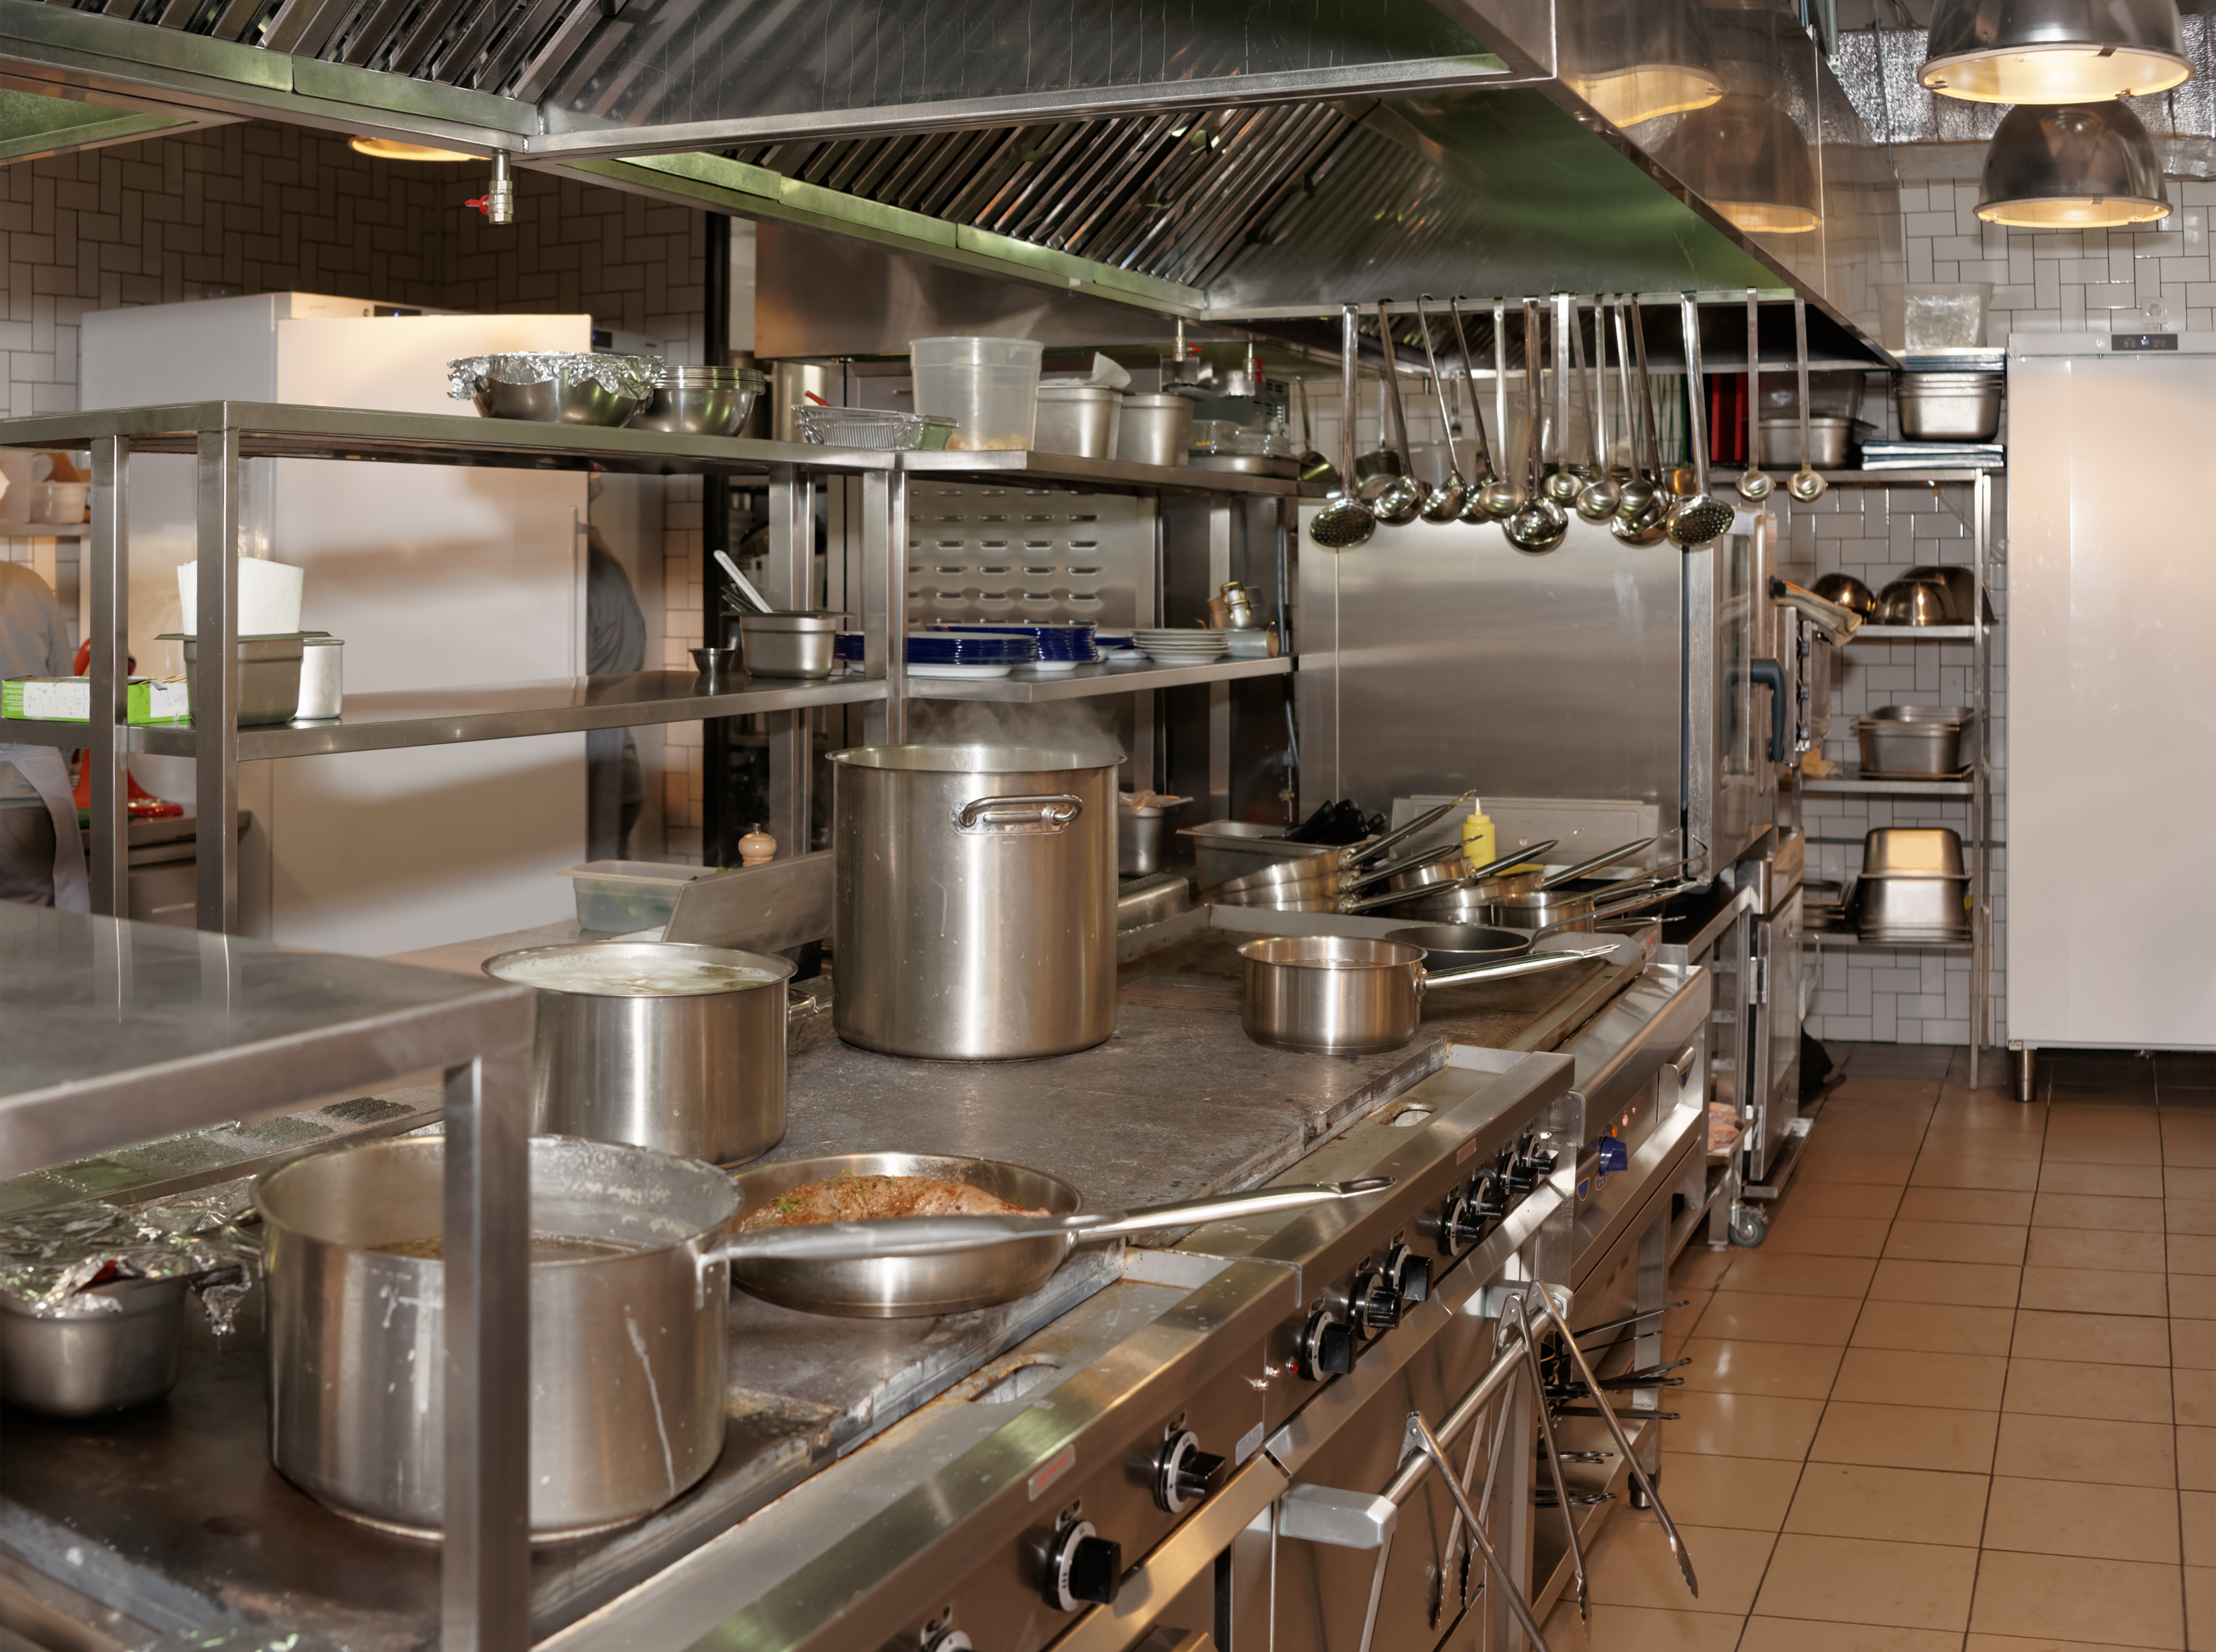 Storage ideas for a commercial kitchen | Caterline